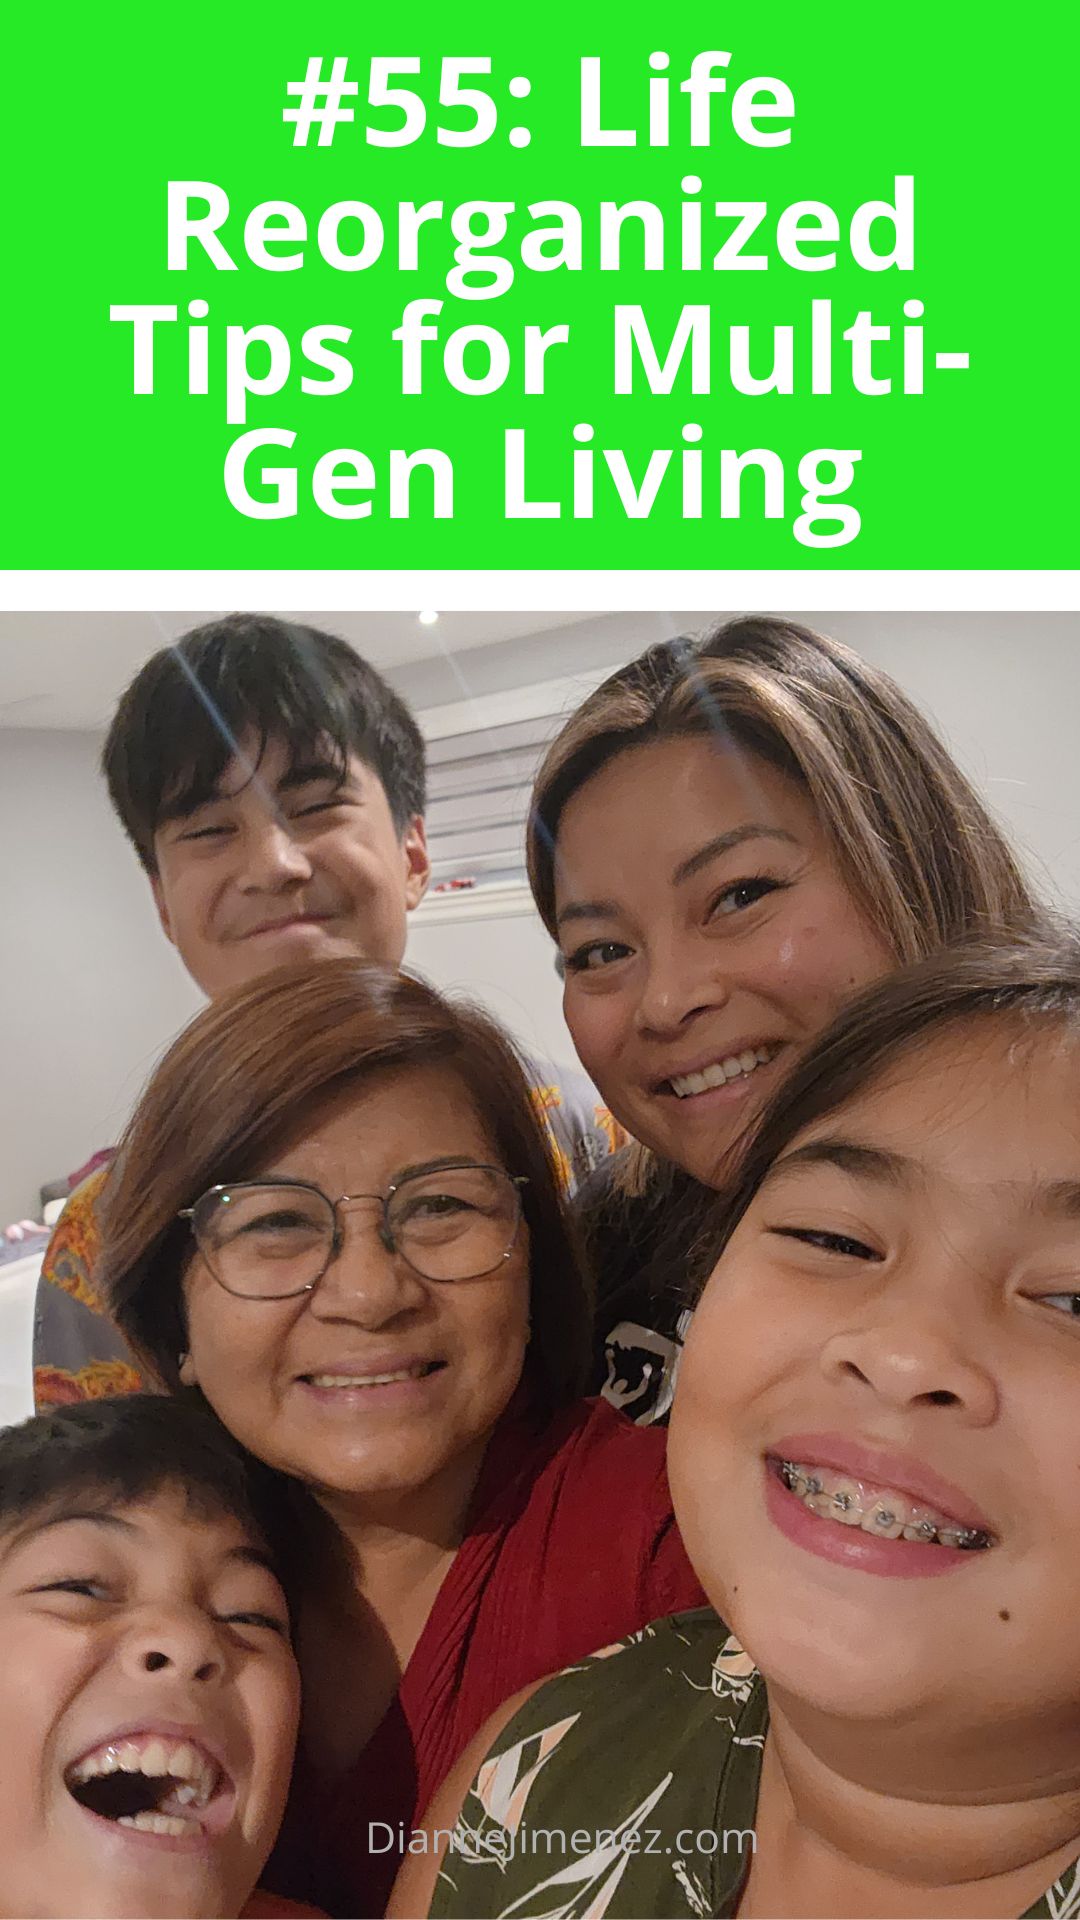 show the 3 generations living under 1 roof